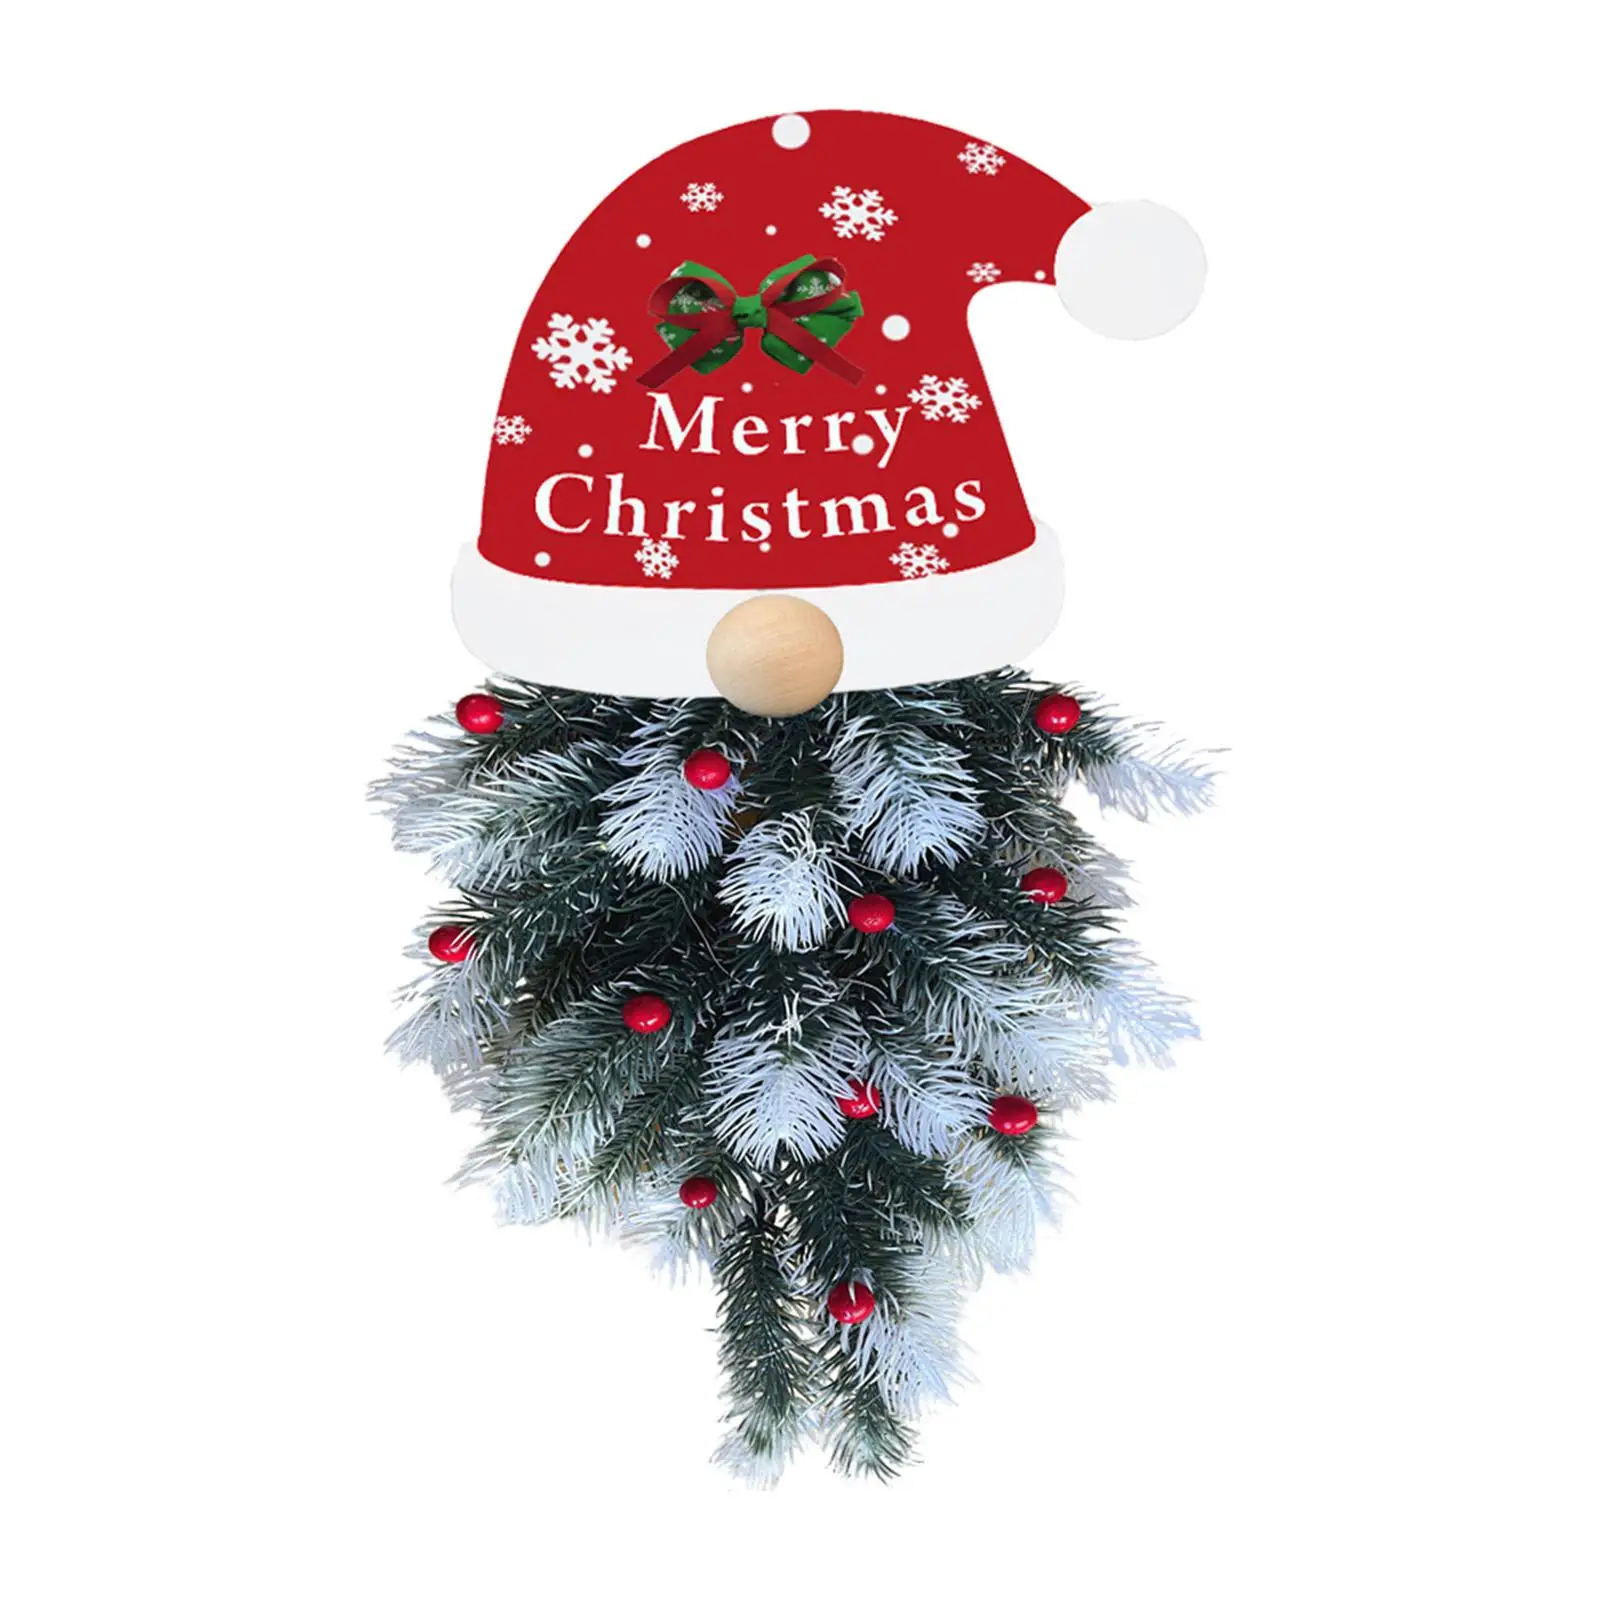 Artificial Christmas Swag Christmas Decoration Ornament for Windows Walls